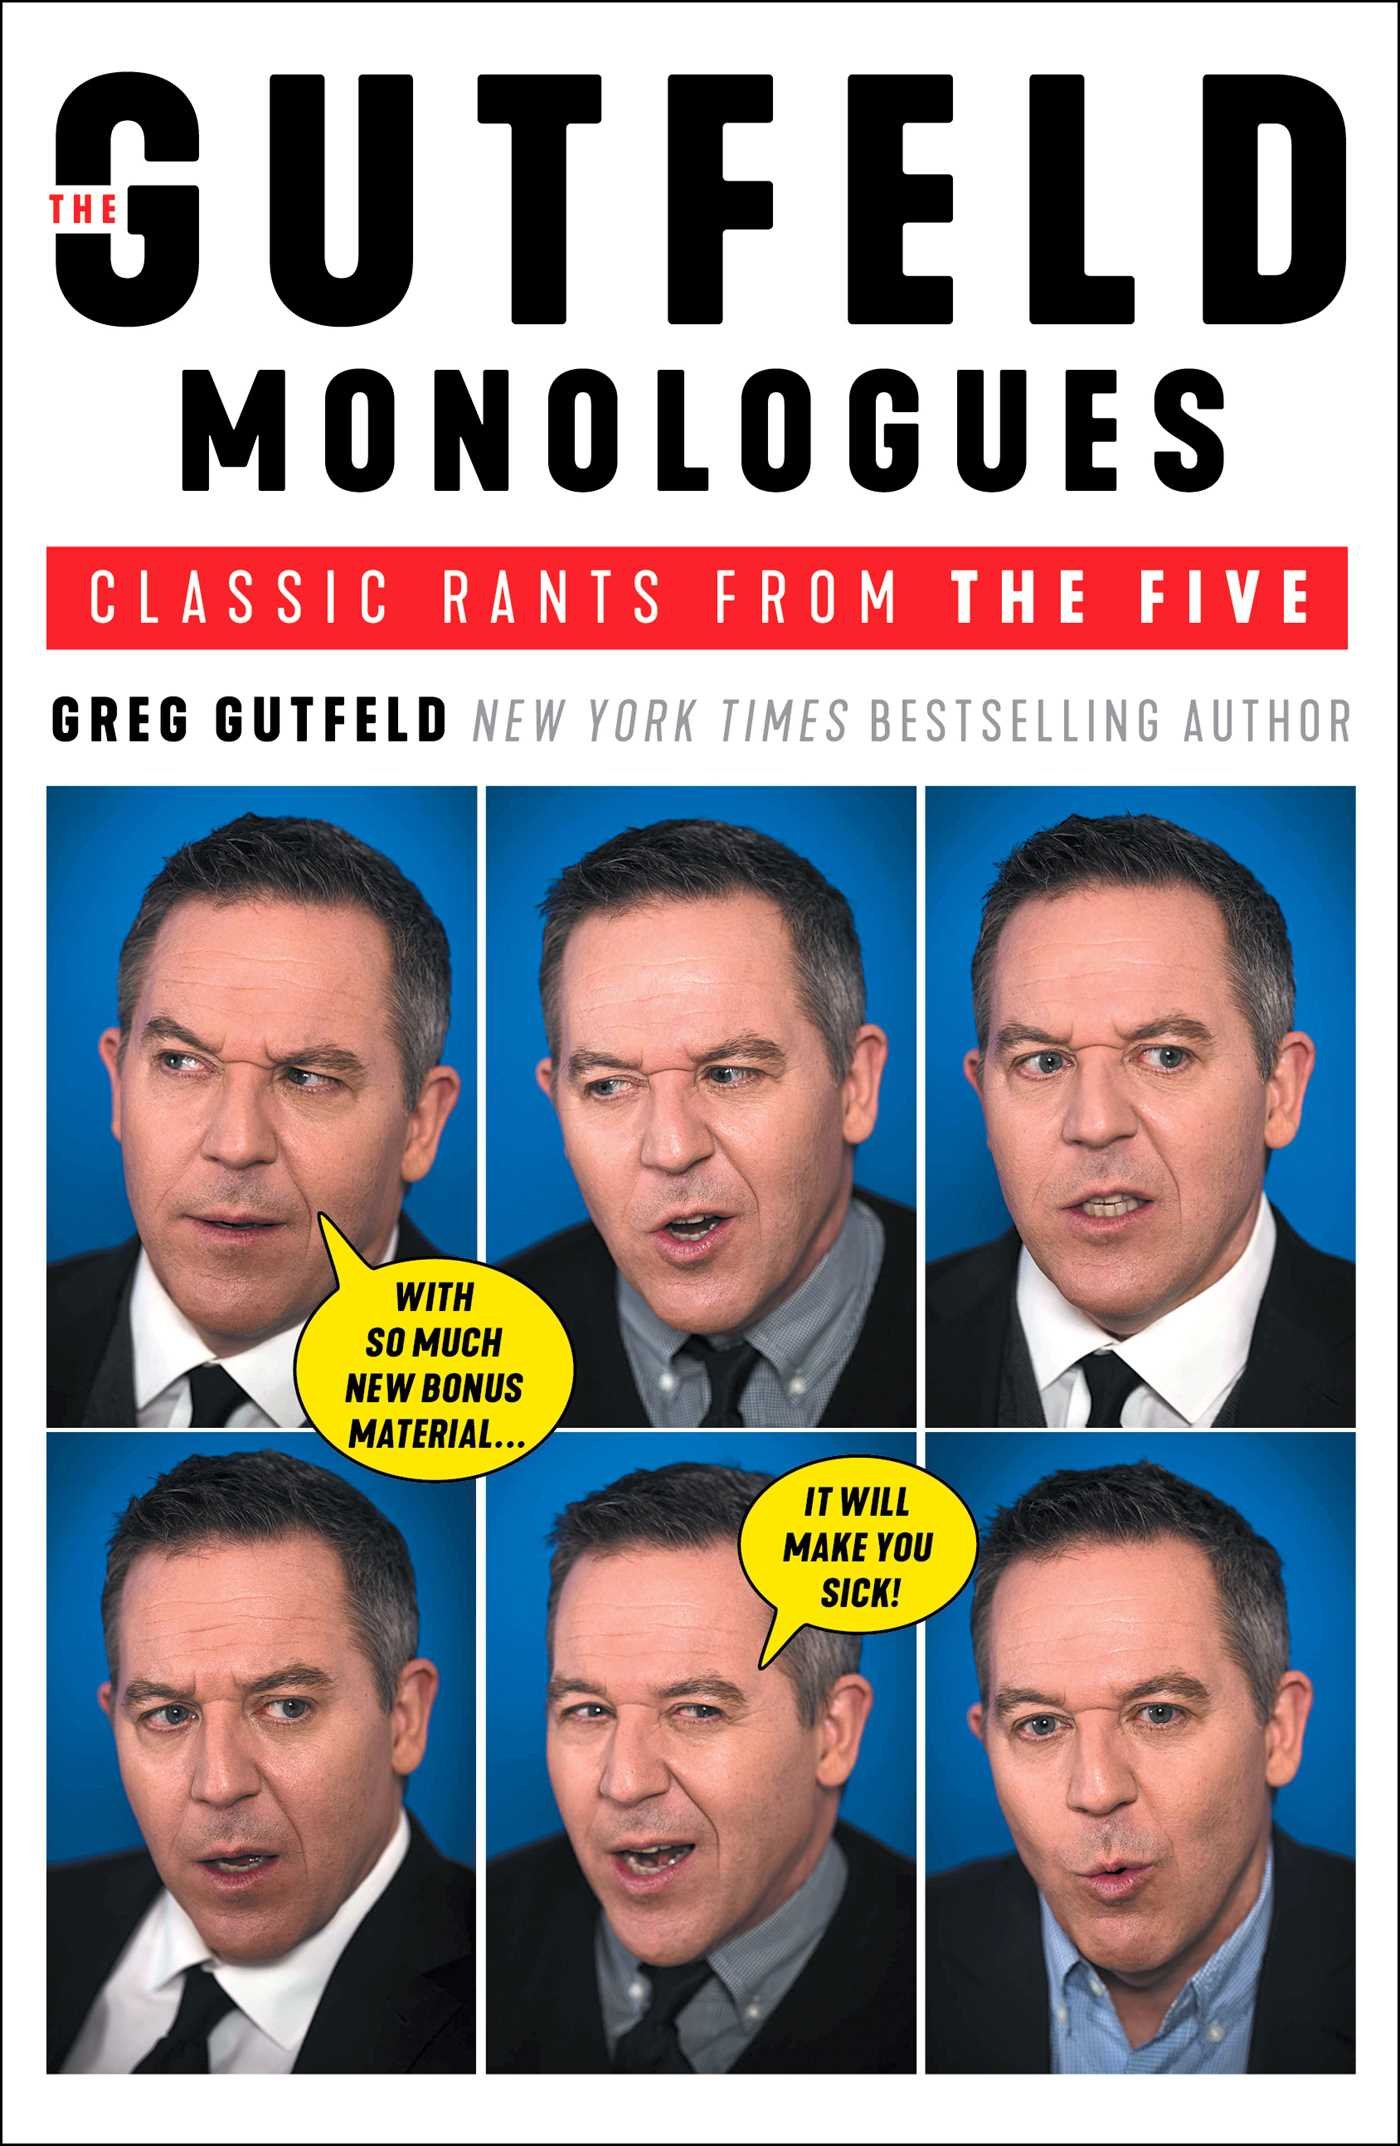 Greg Gutfeld “The Gutfeld Monologues” Signing in August Book Signing